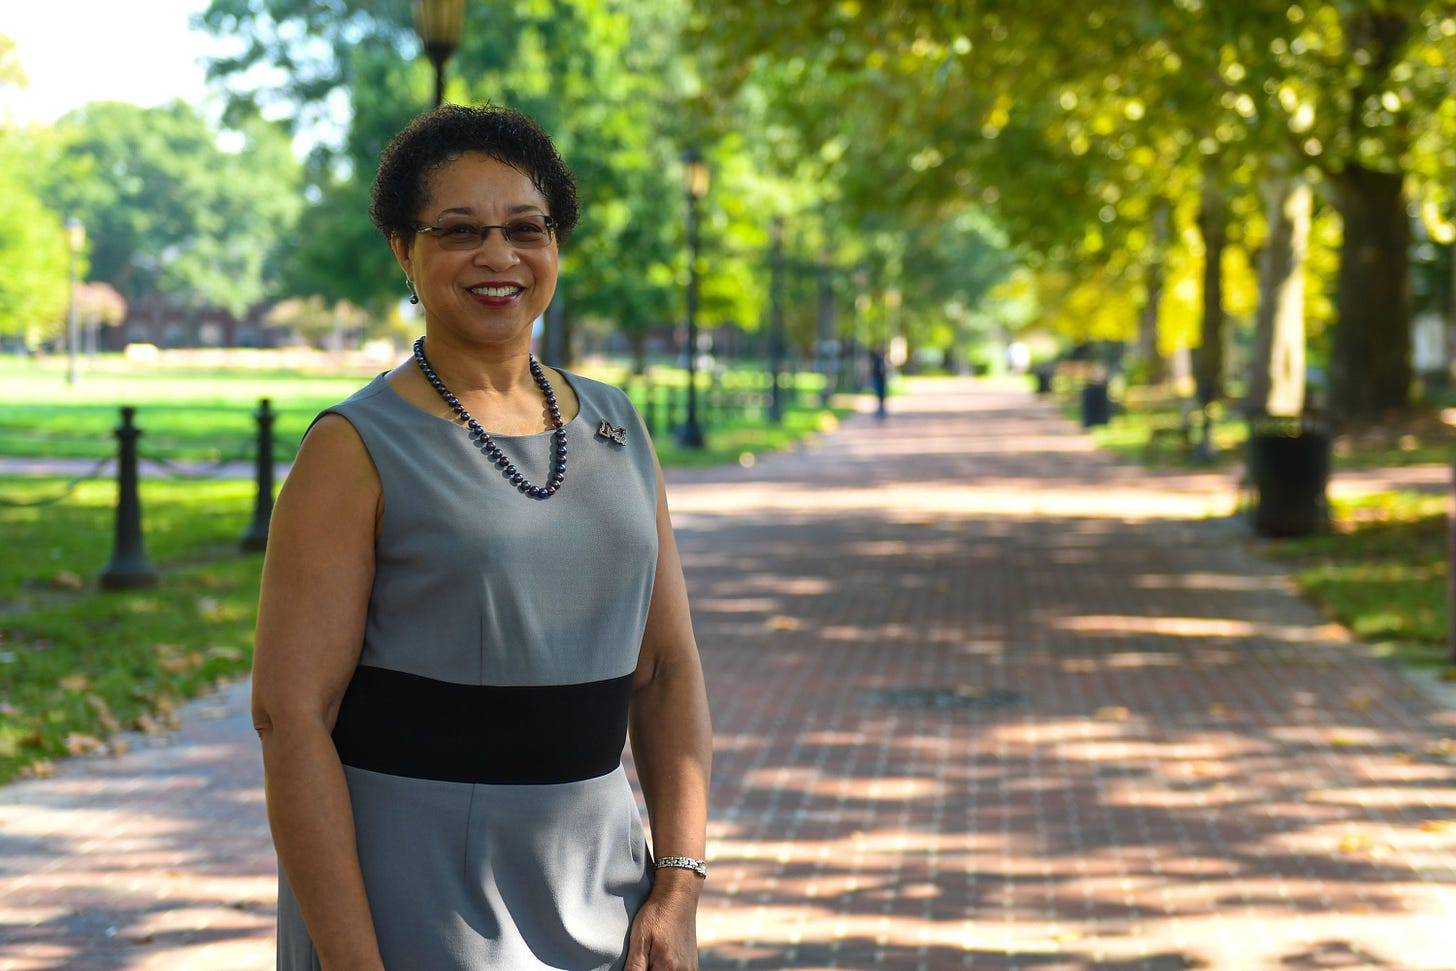 UMES' new president focused on access, opportunity and quality